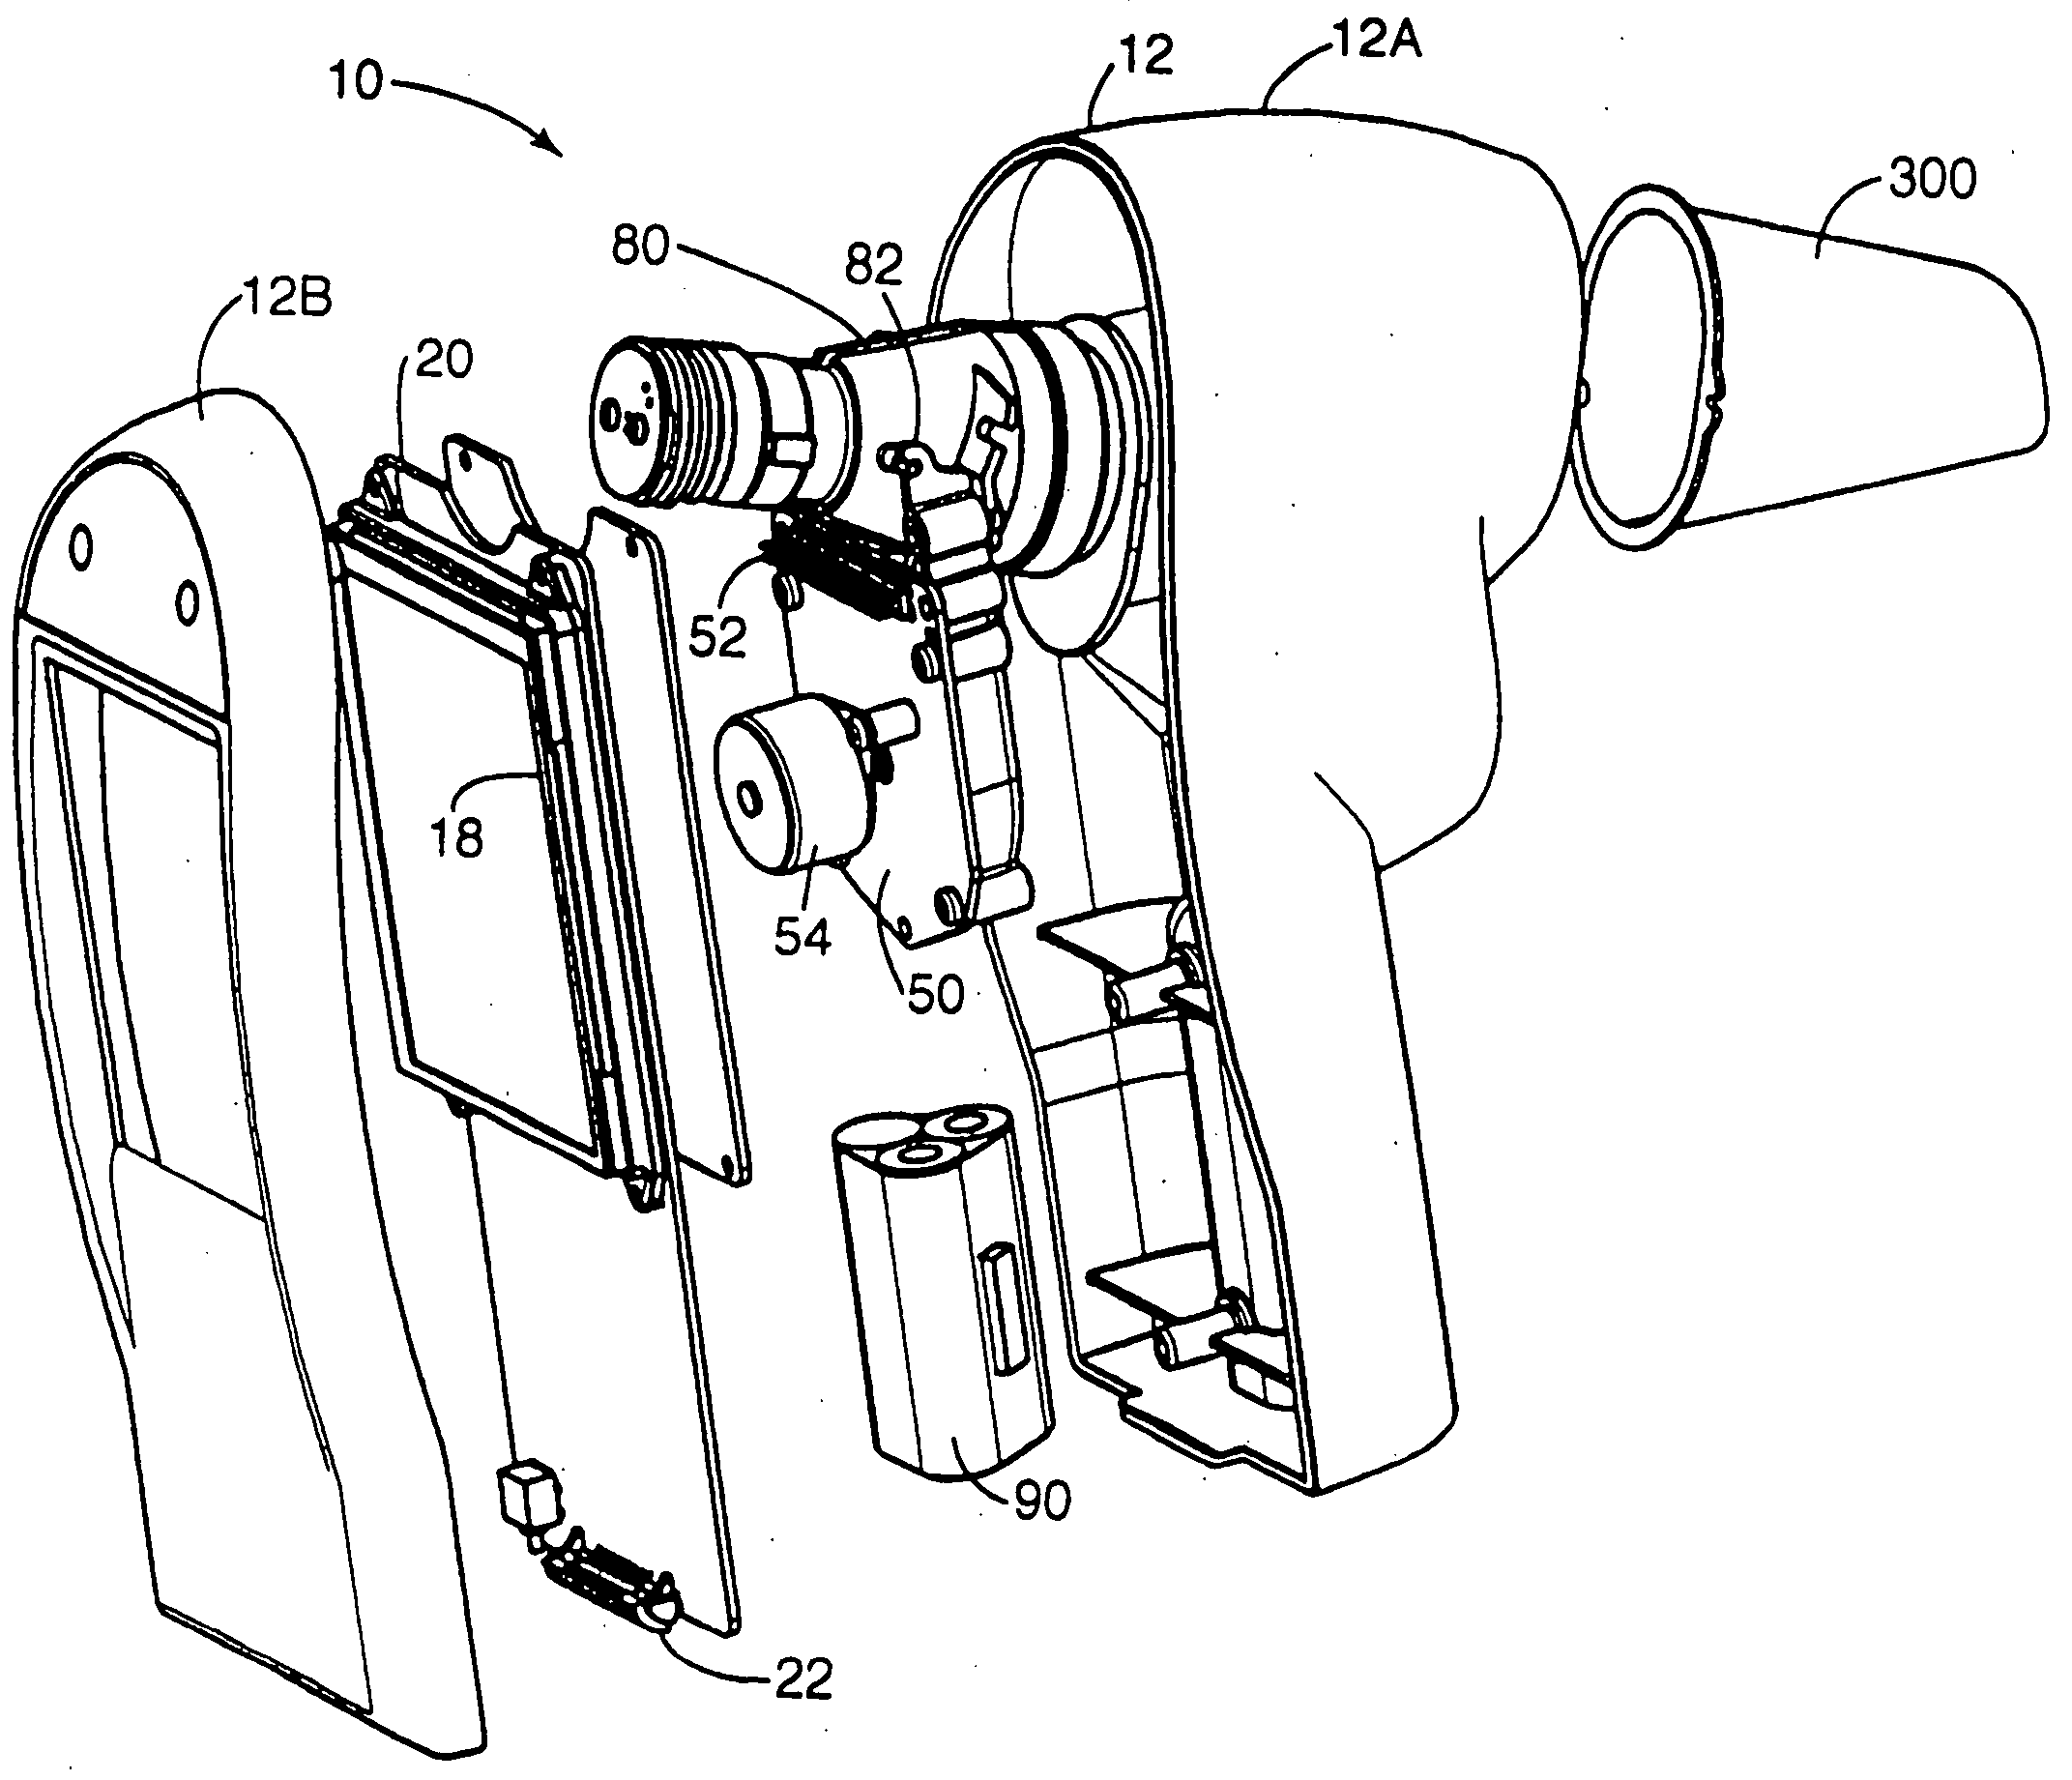 Optical measurement device and related process